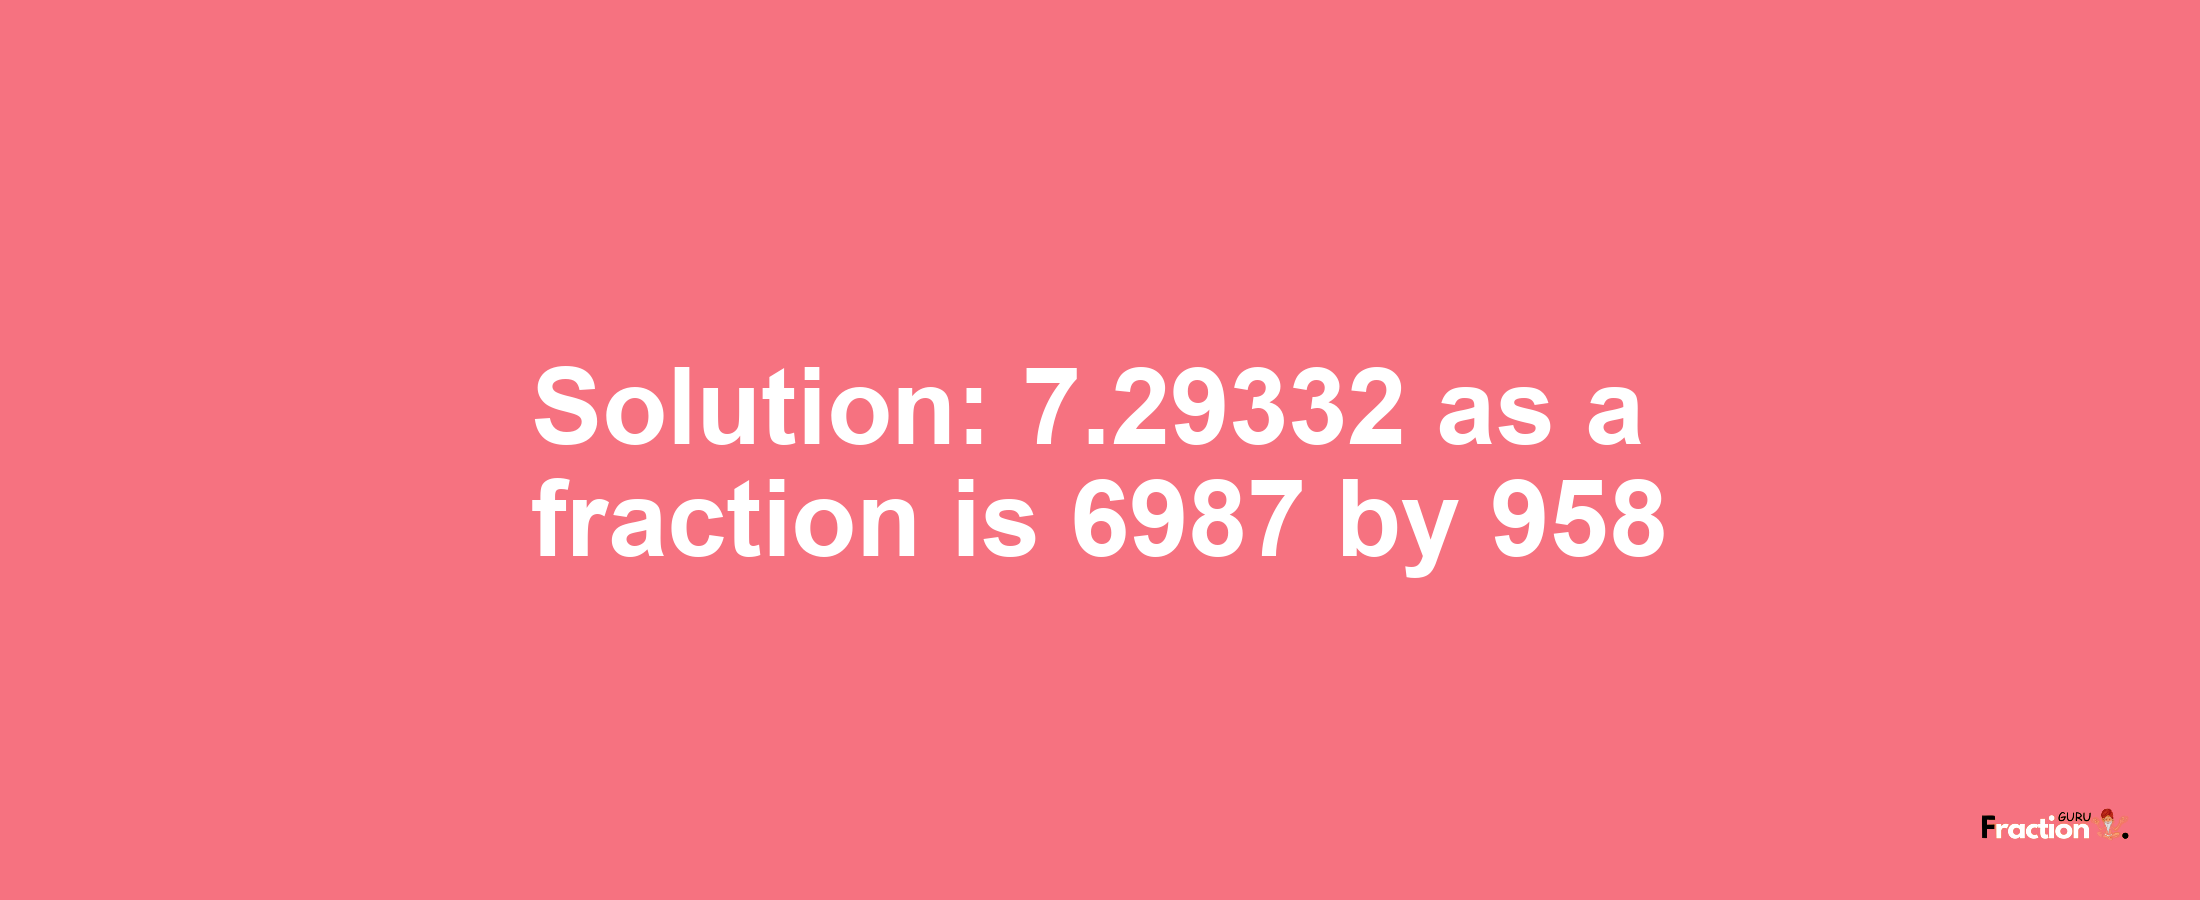 Solution:7.29332 as a fraction is 6987/958